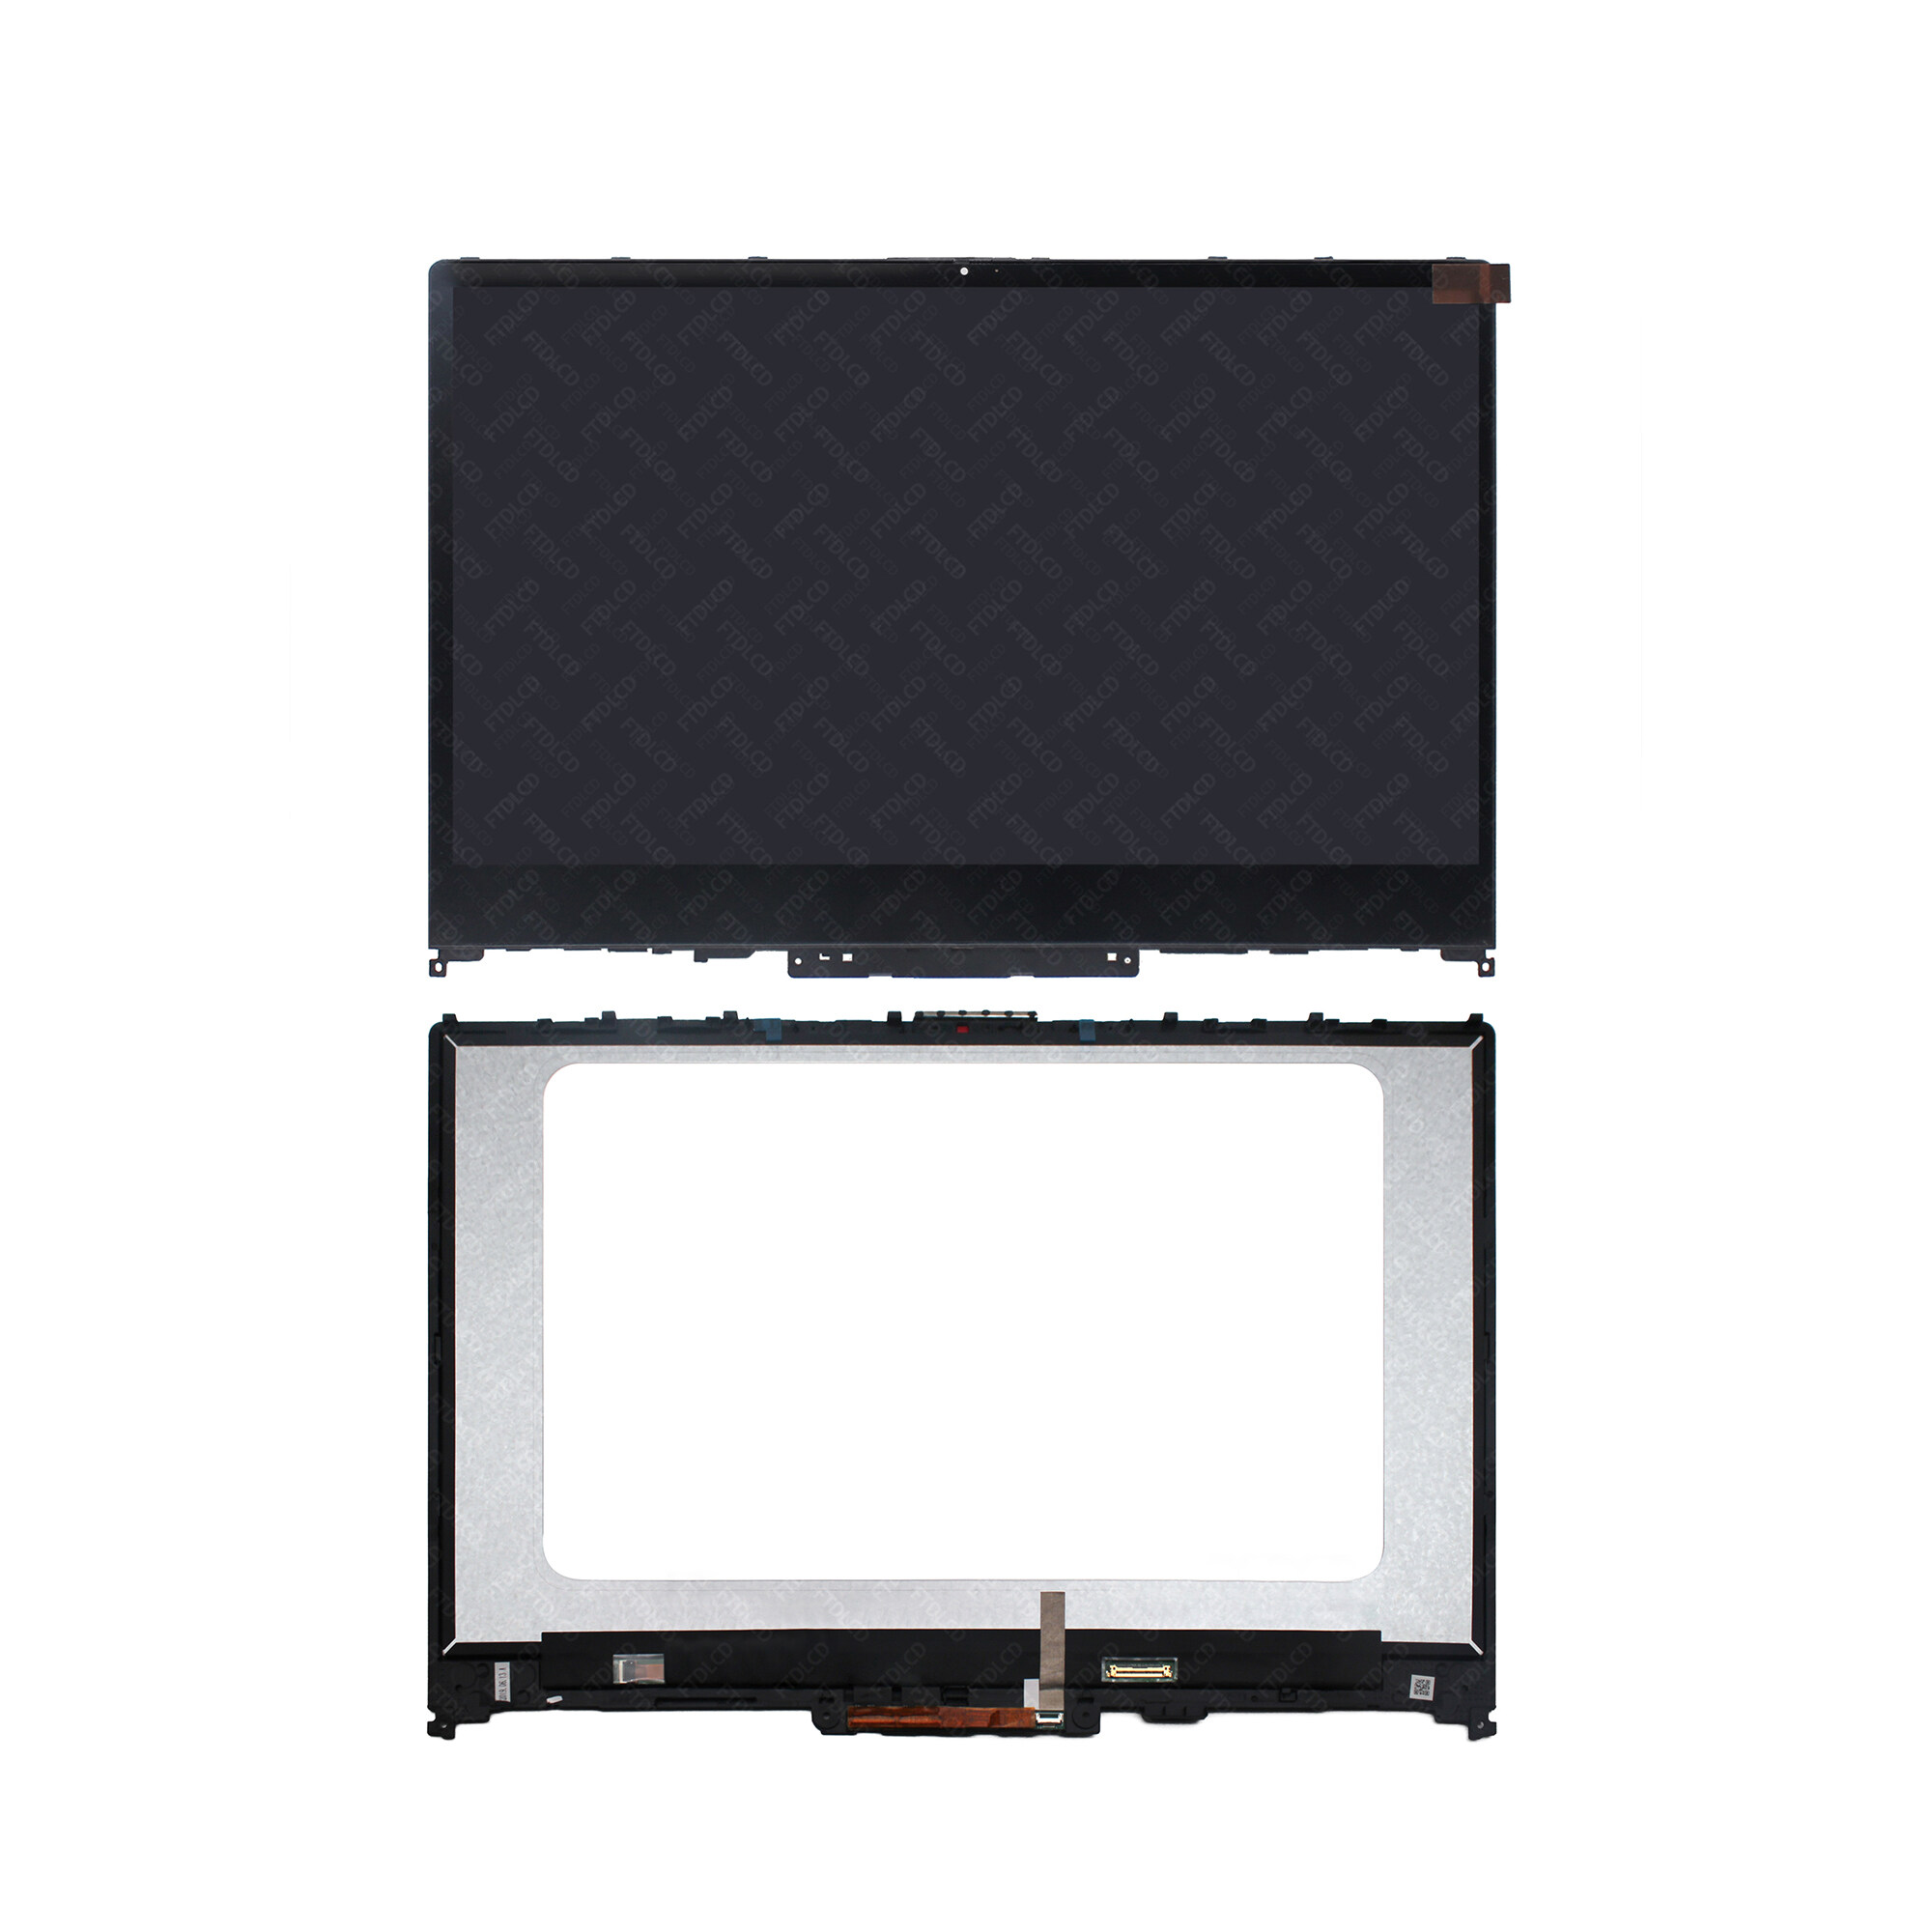 Kreplacement FHD LCD Screen Display Panel Touch Digitizer Glass Assembly + Bezel 5D10S39565 5D10S39566 for Lenovo IdeaPad Flex-15IWL 81SR